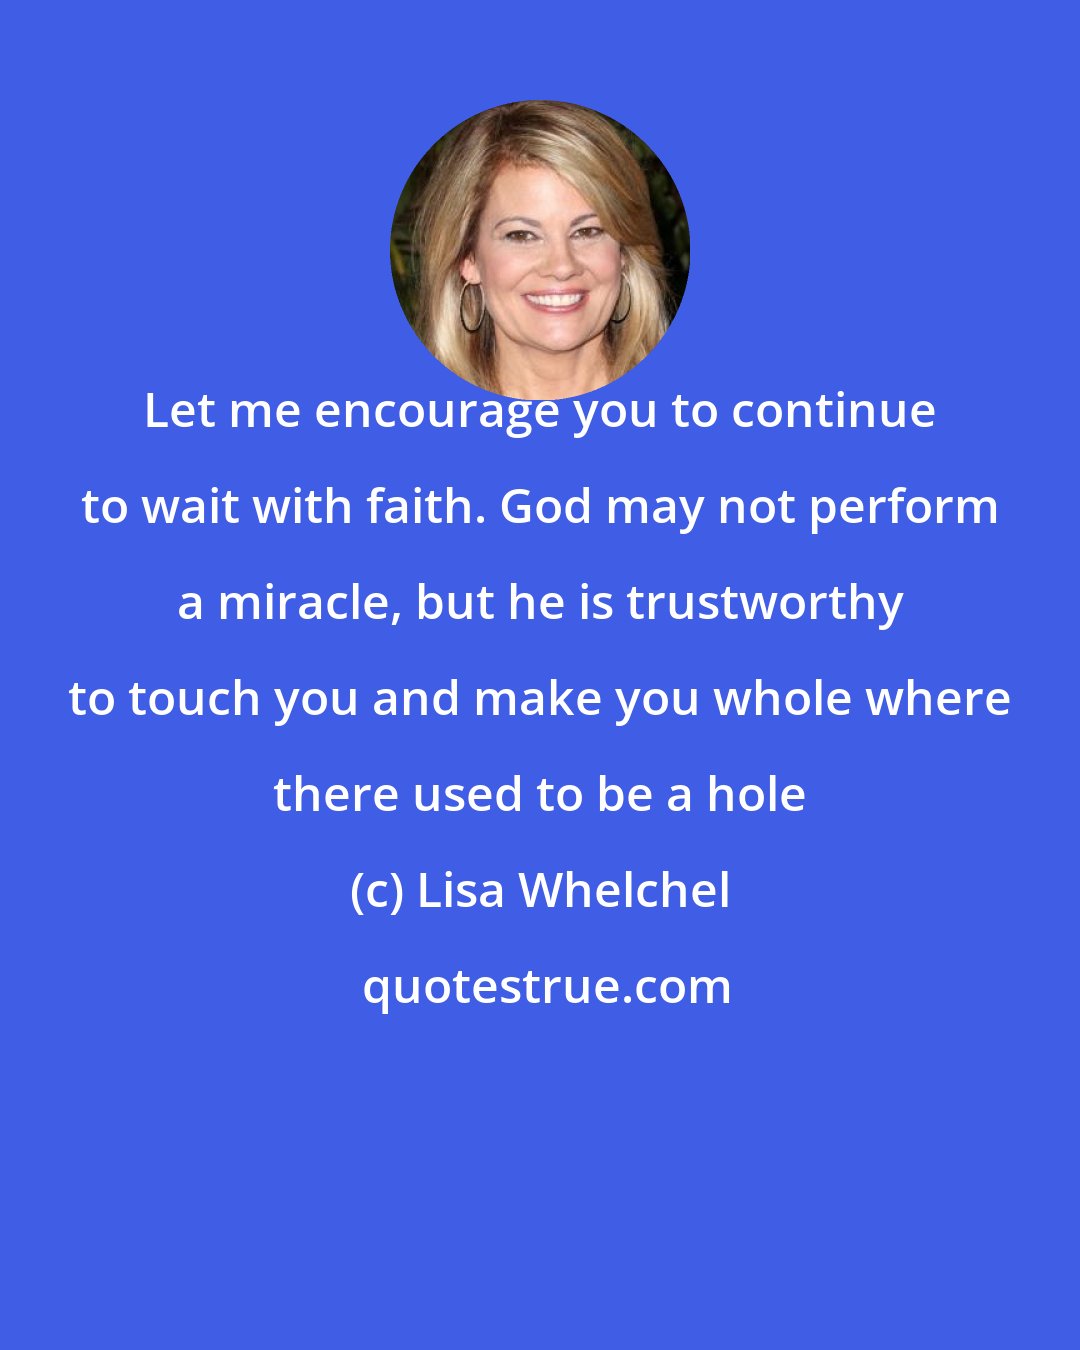 Lisa Whelchel: Let me encourage you to continue to wait with faith. God may not perform a miracle, but he is trustworthy to touch you and make you whole where there used to be a hole